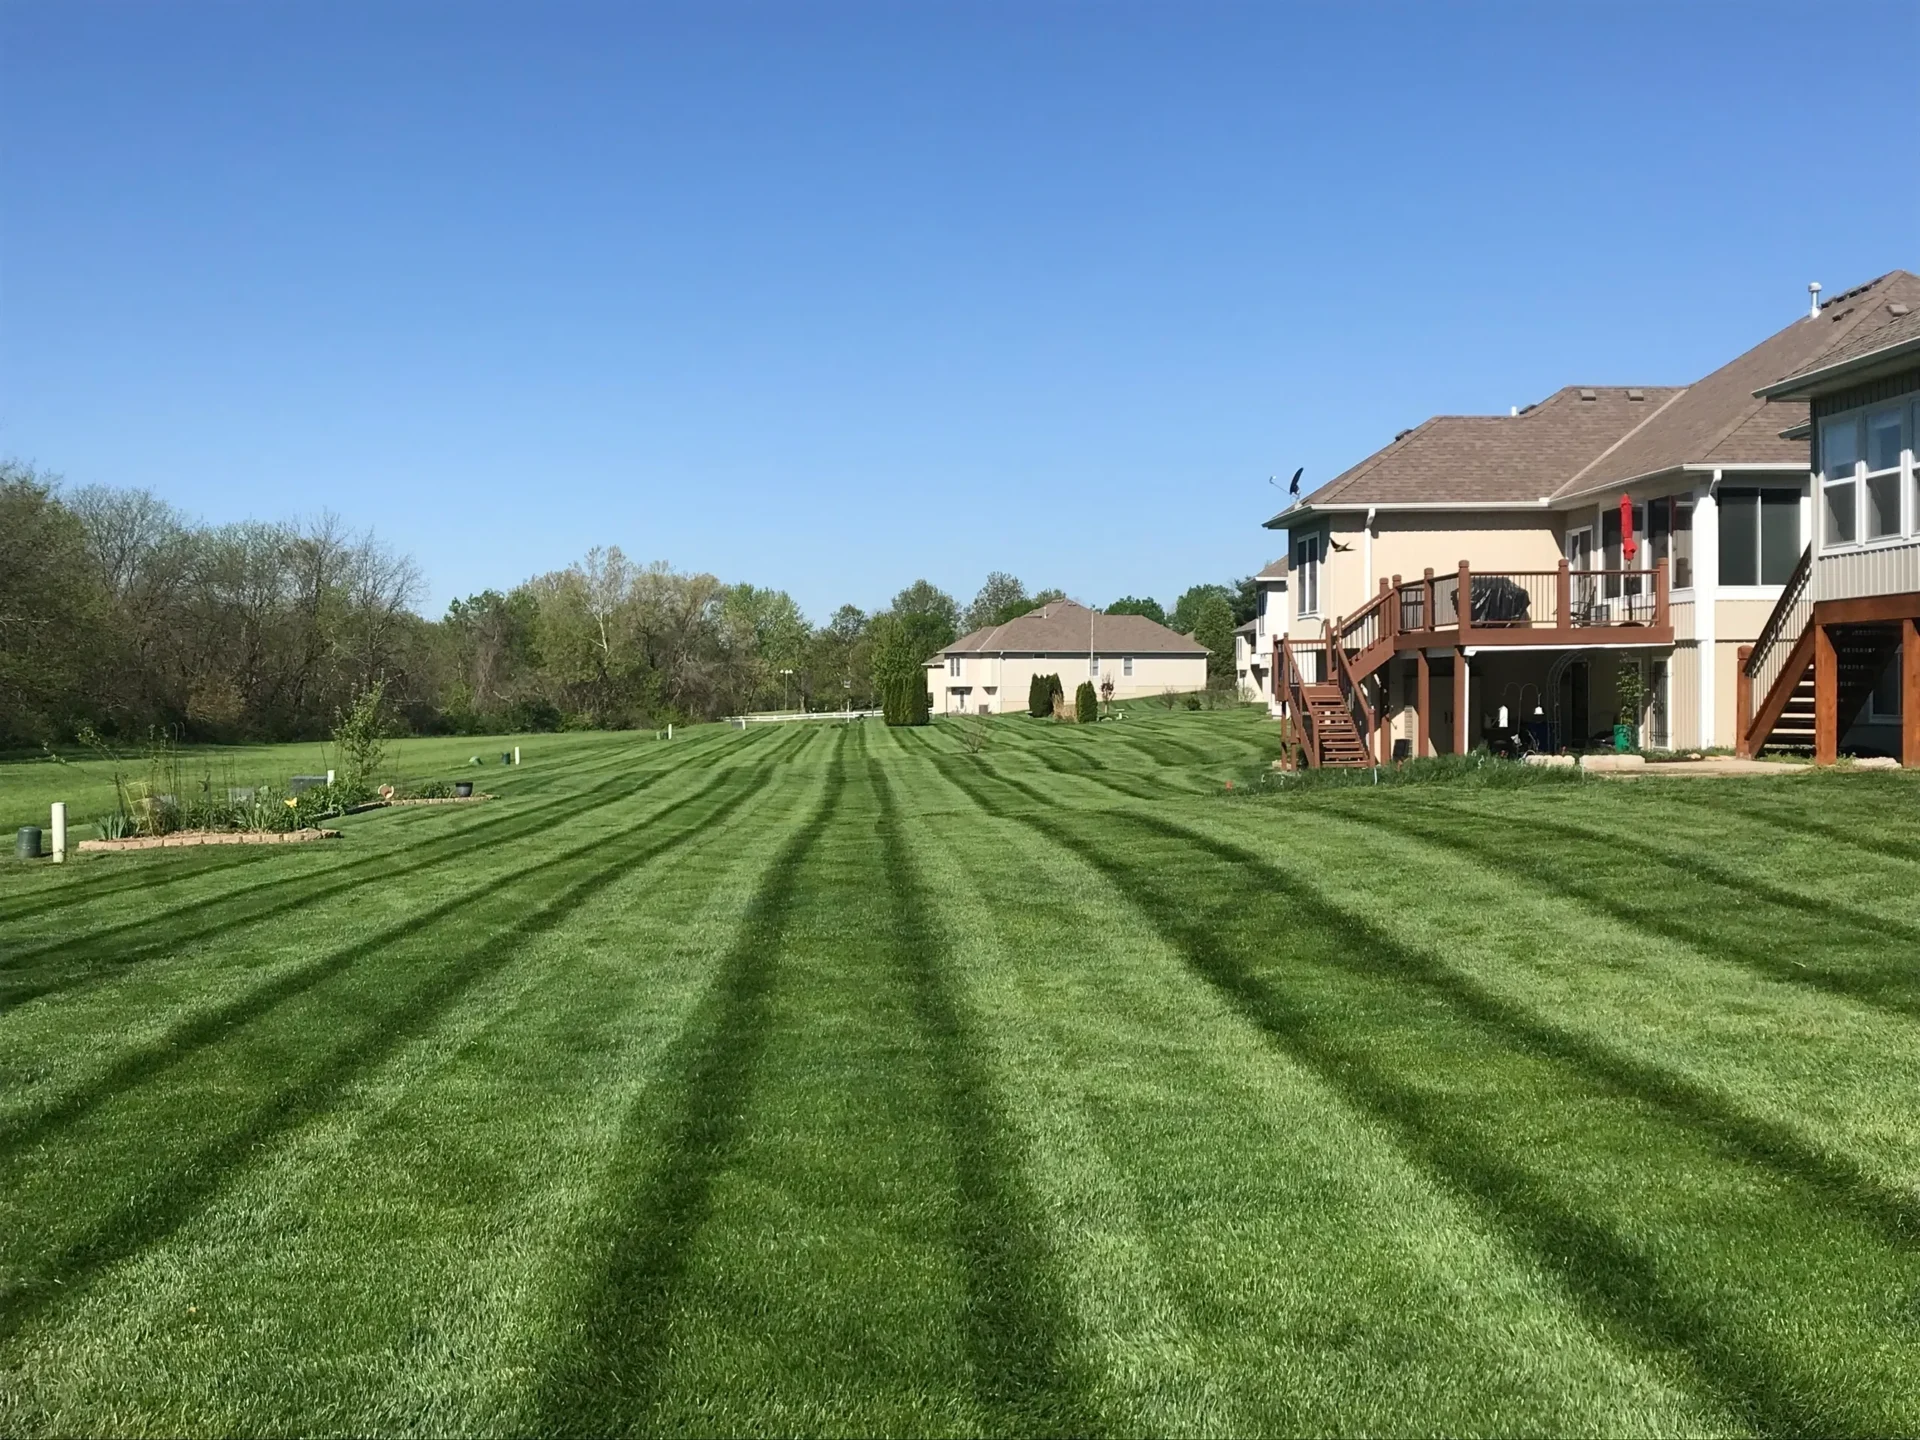 A large lawn with many lines in the middle of it